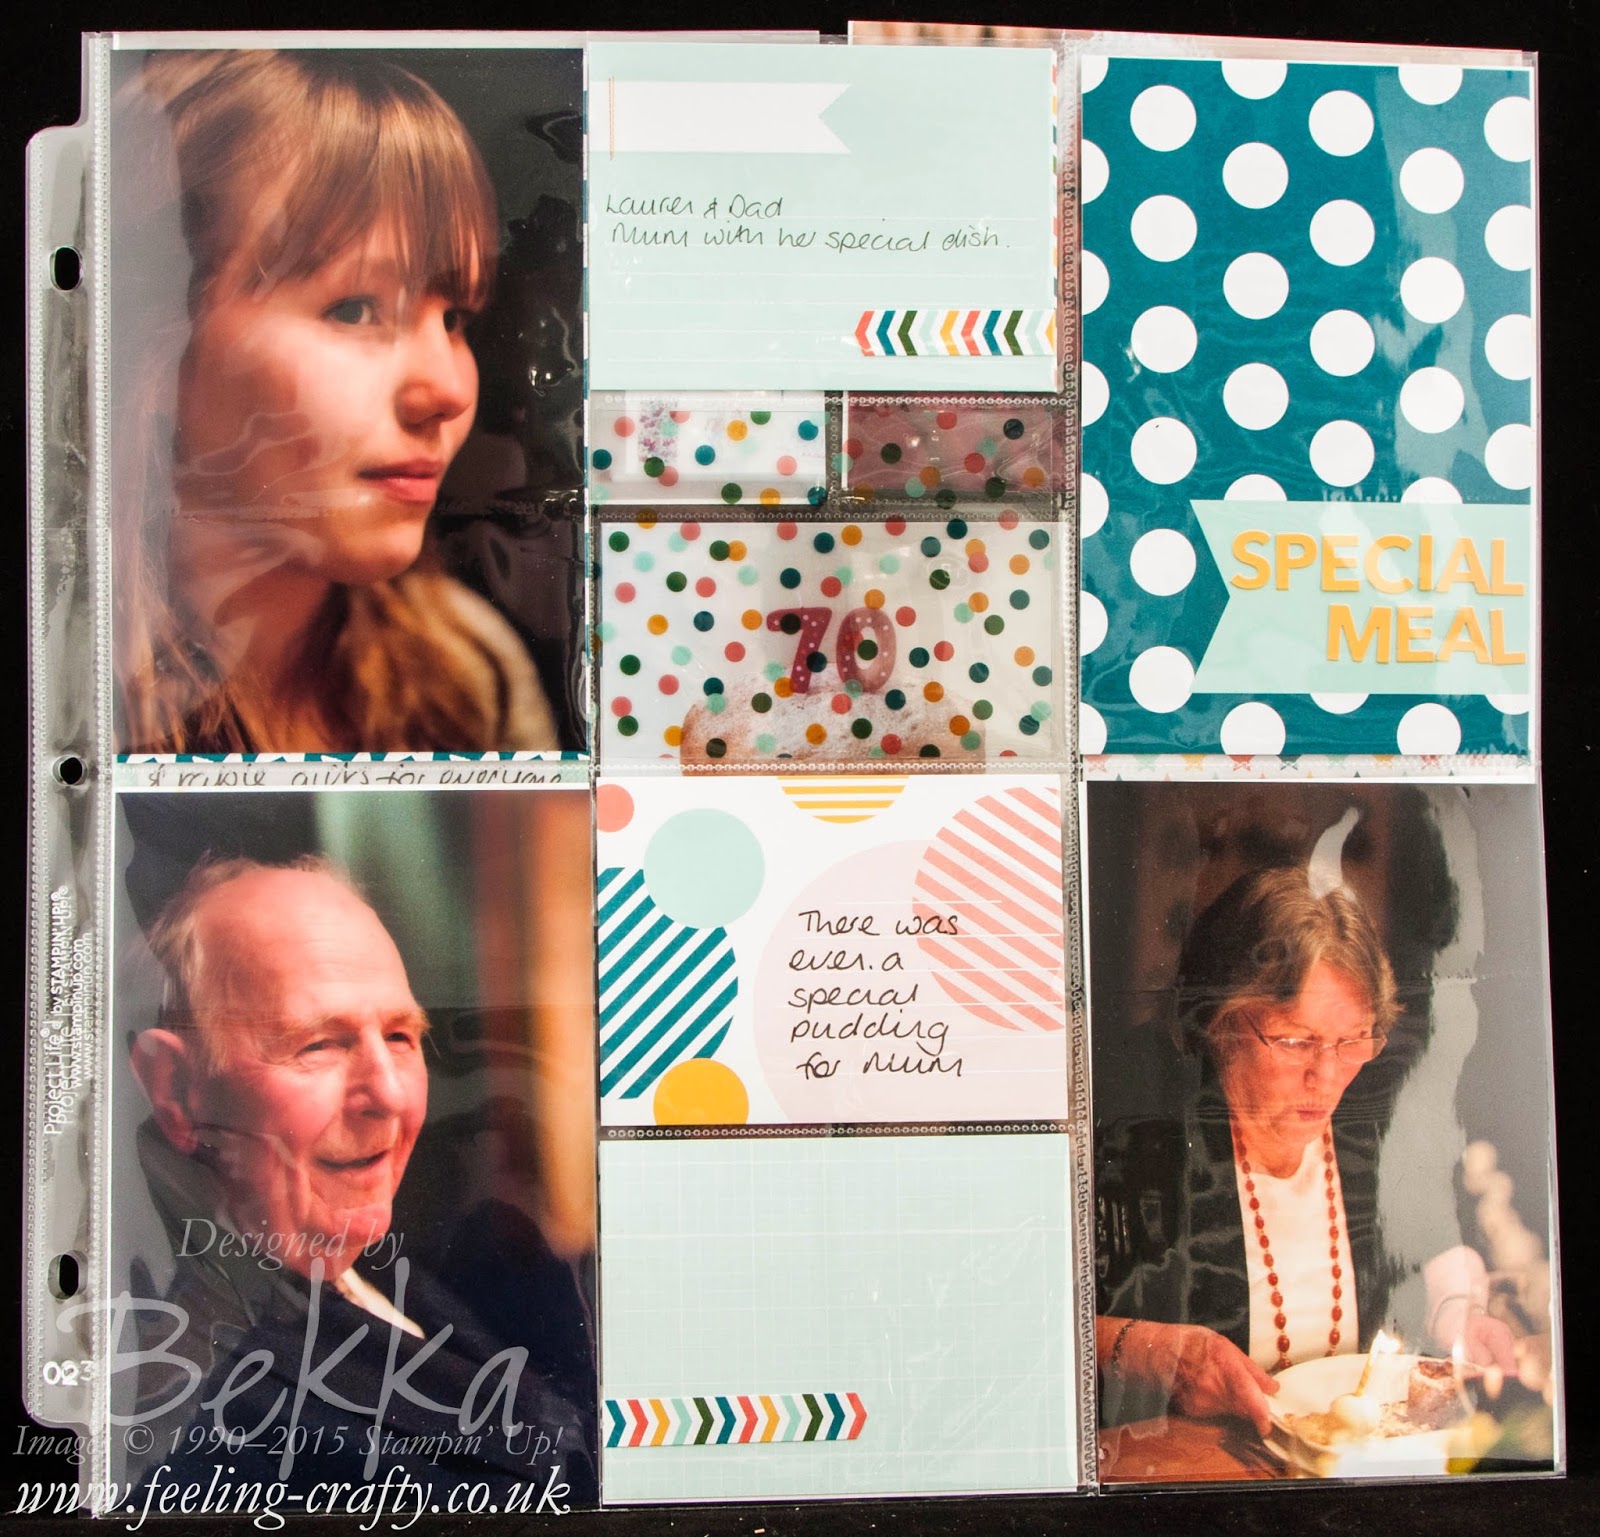 Project Life by Stampin' Up! - Documenting A Special Weekend - check it out here